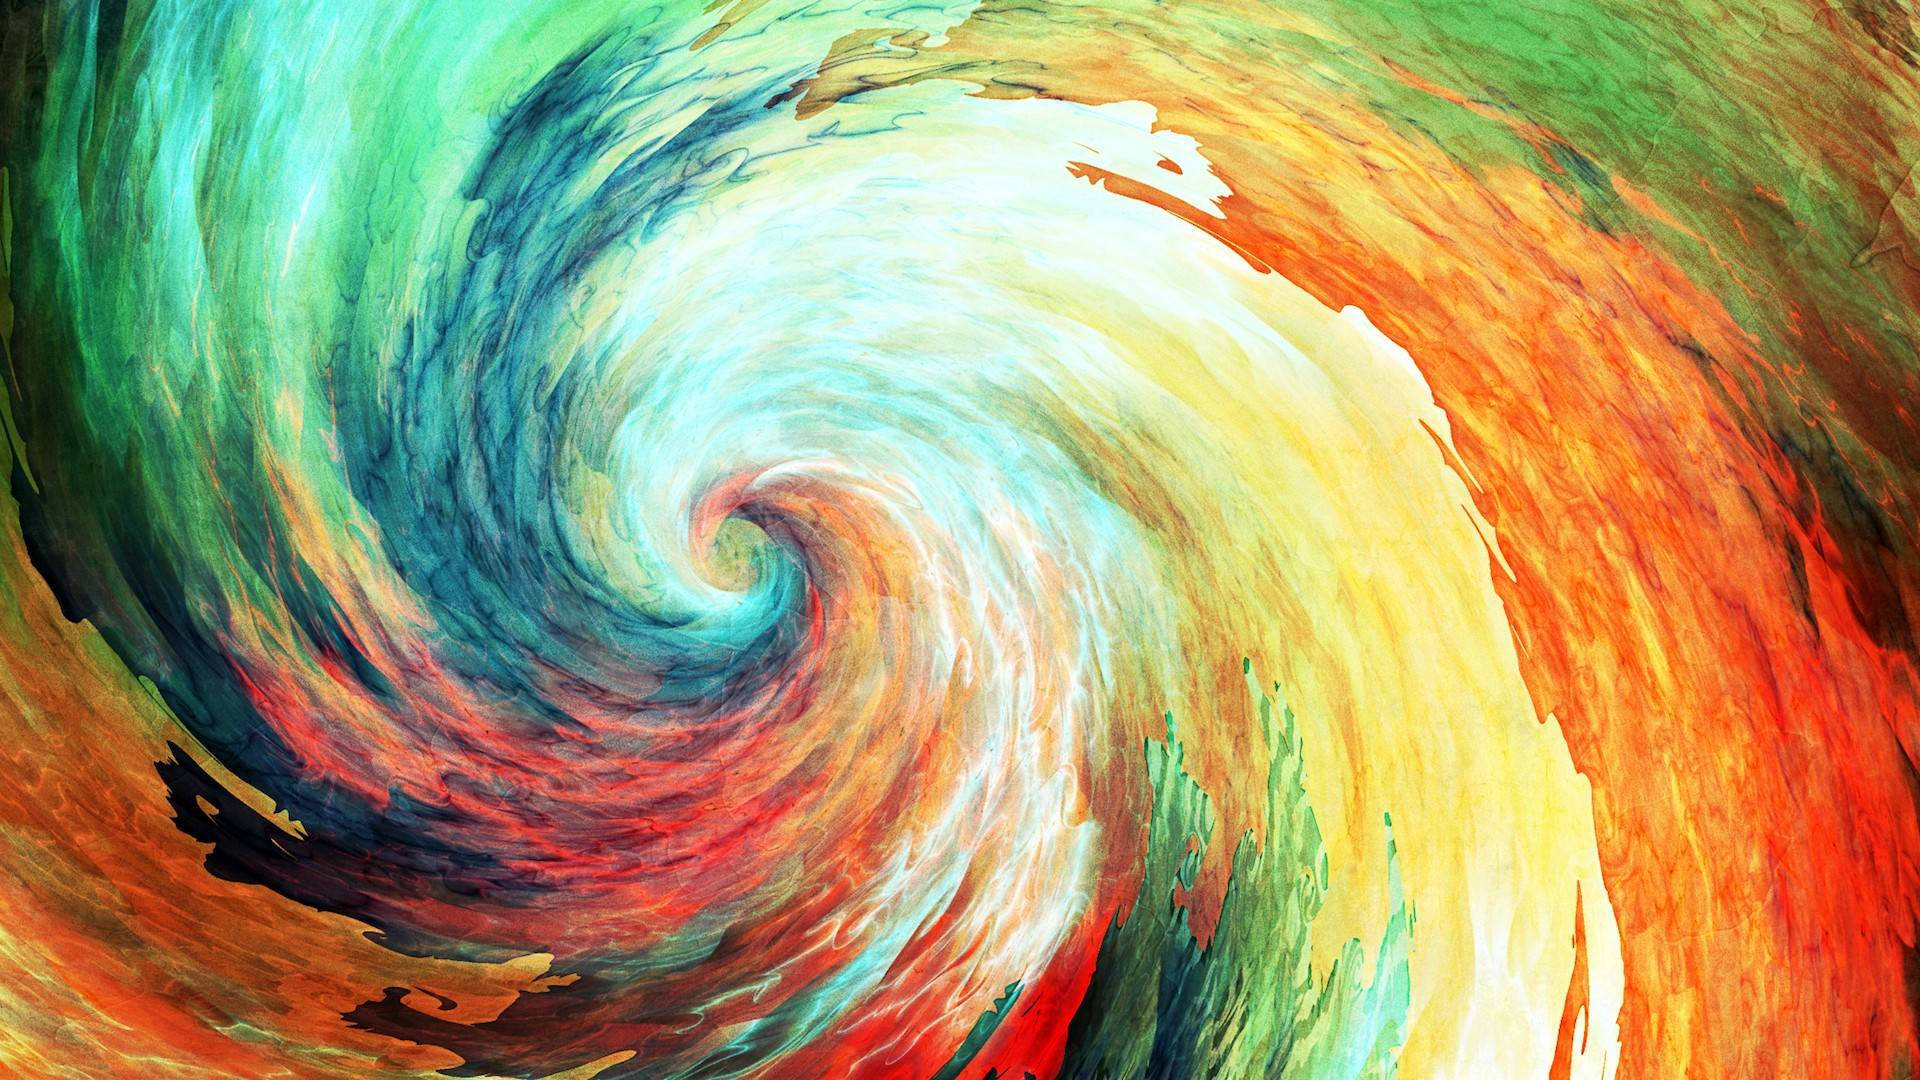 Swirling Abstract Art